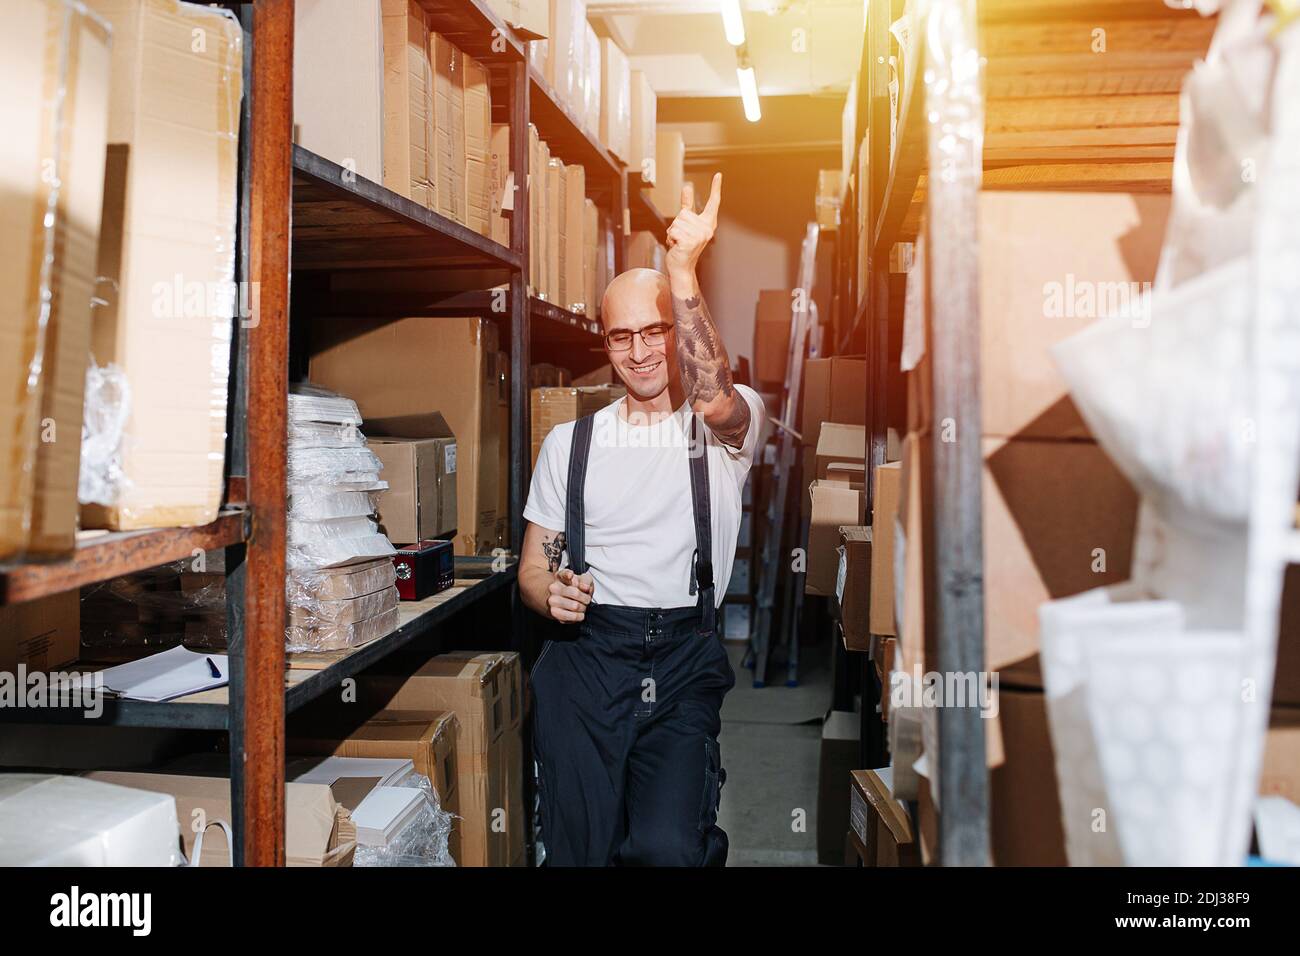 Smiling funny warehouse worker dance-walking between tall rows of shelves Stock Photo